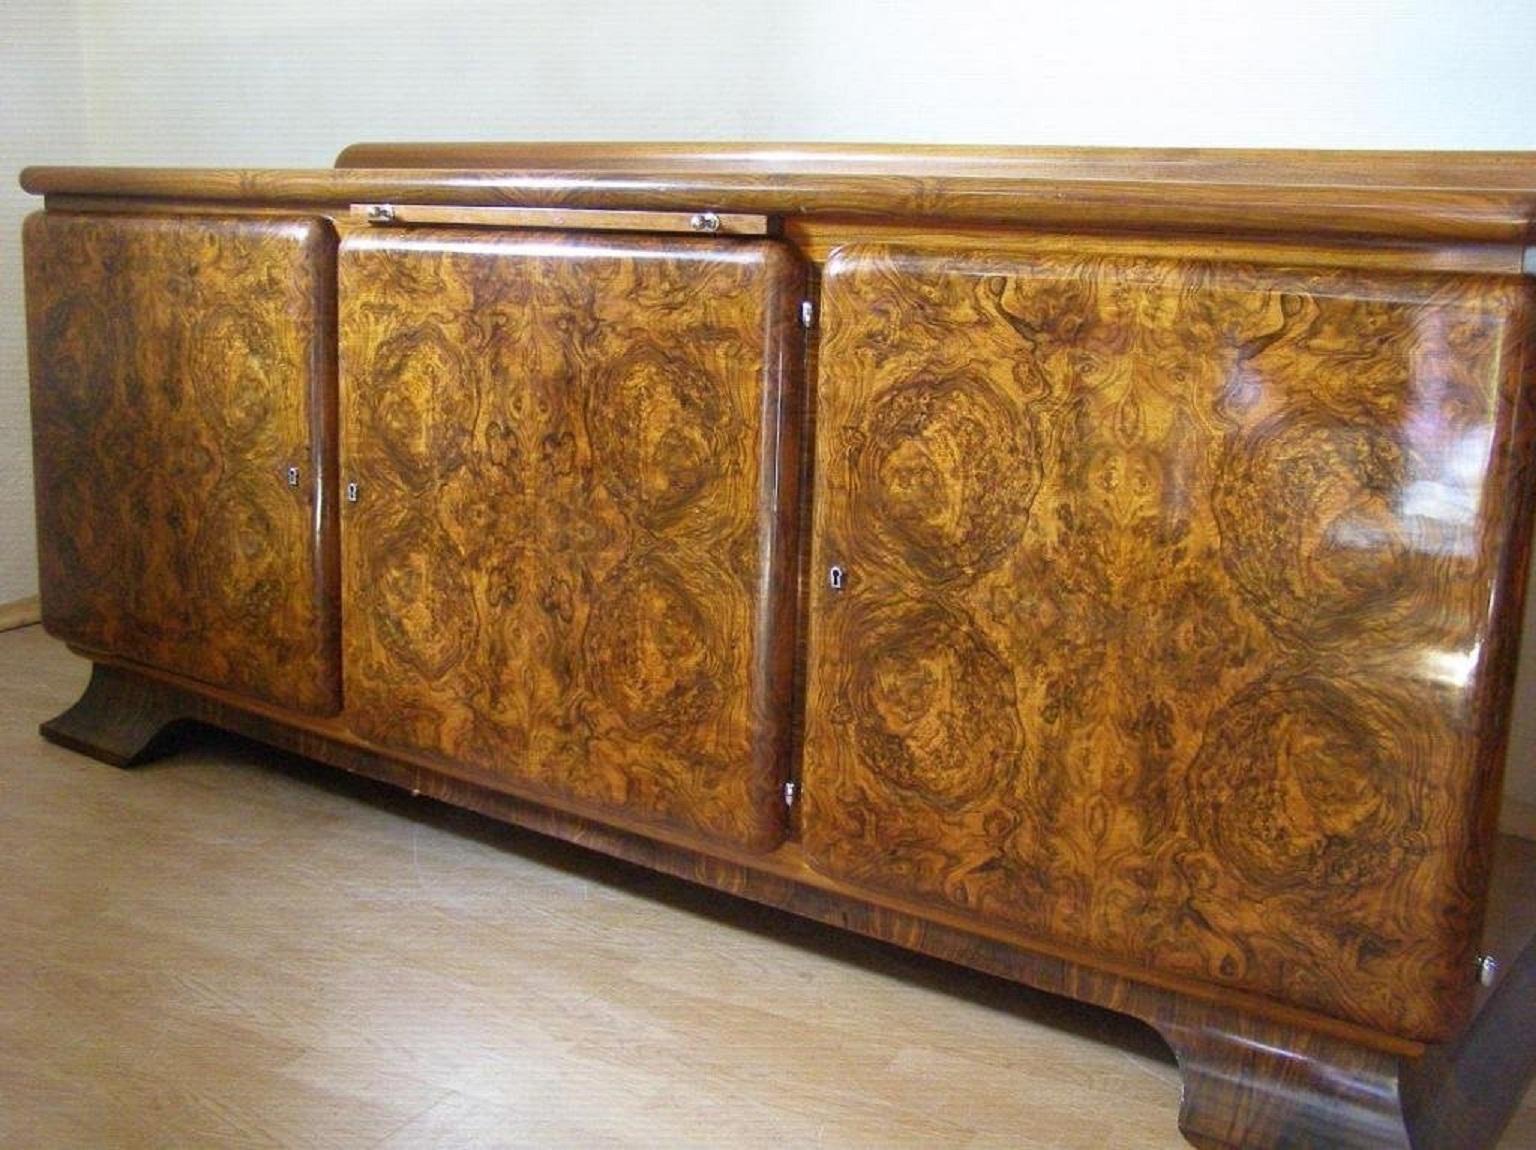 We present a made to order, unique designer Art Deco buffet from 1920, designed and made by a famous designer and carperter Jindrich Halabala - (a Czech designer ranked among the most outstanding creators of the modern period. The peak of his career